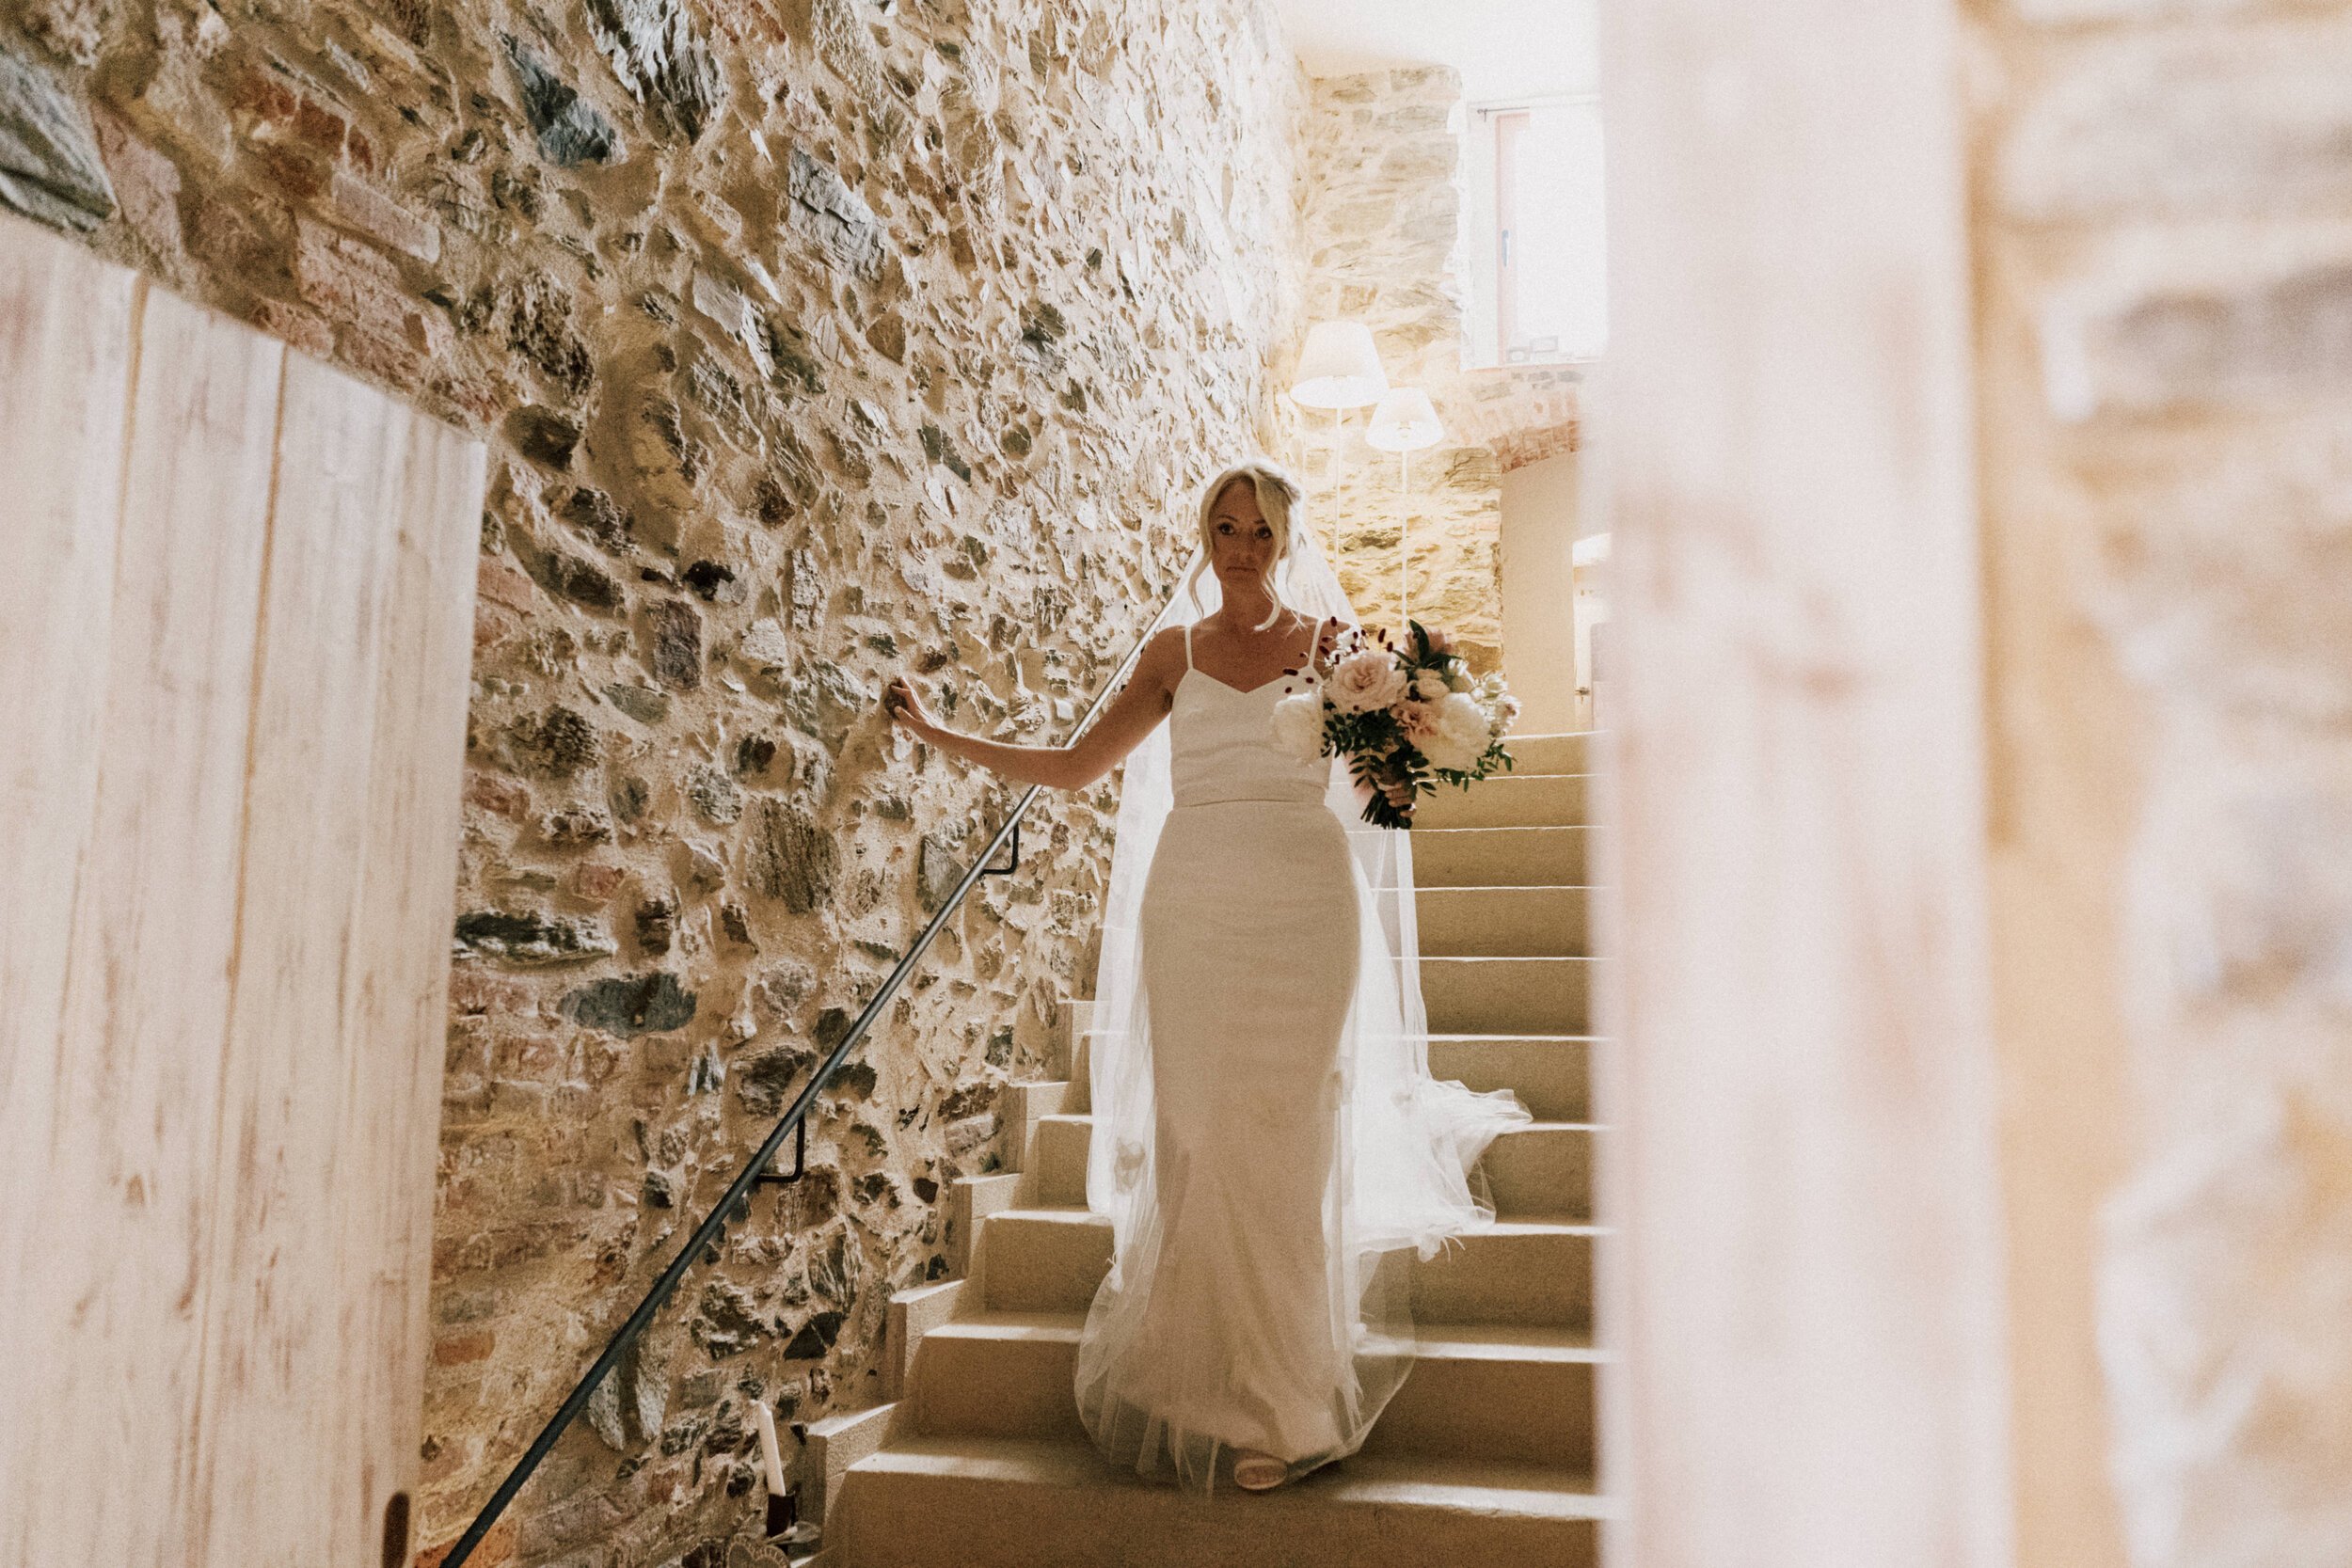 Beautiful bride Lucy wore a wedding dress by Halfpenny London